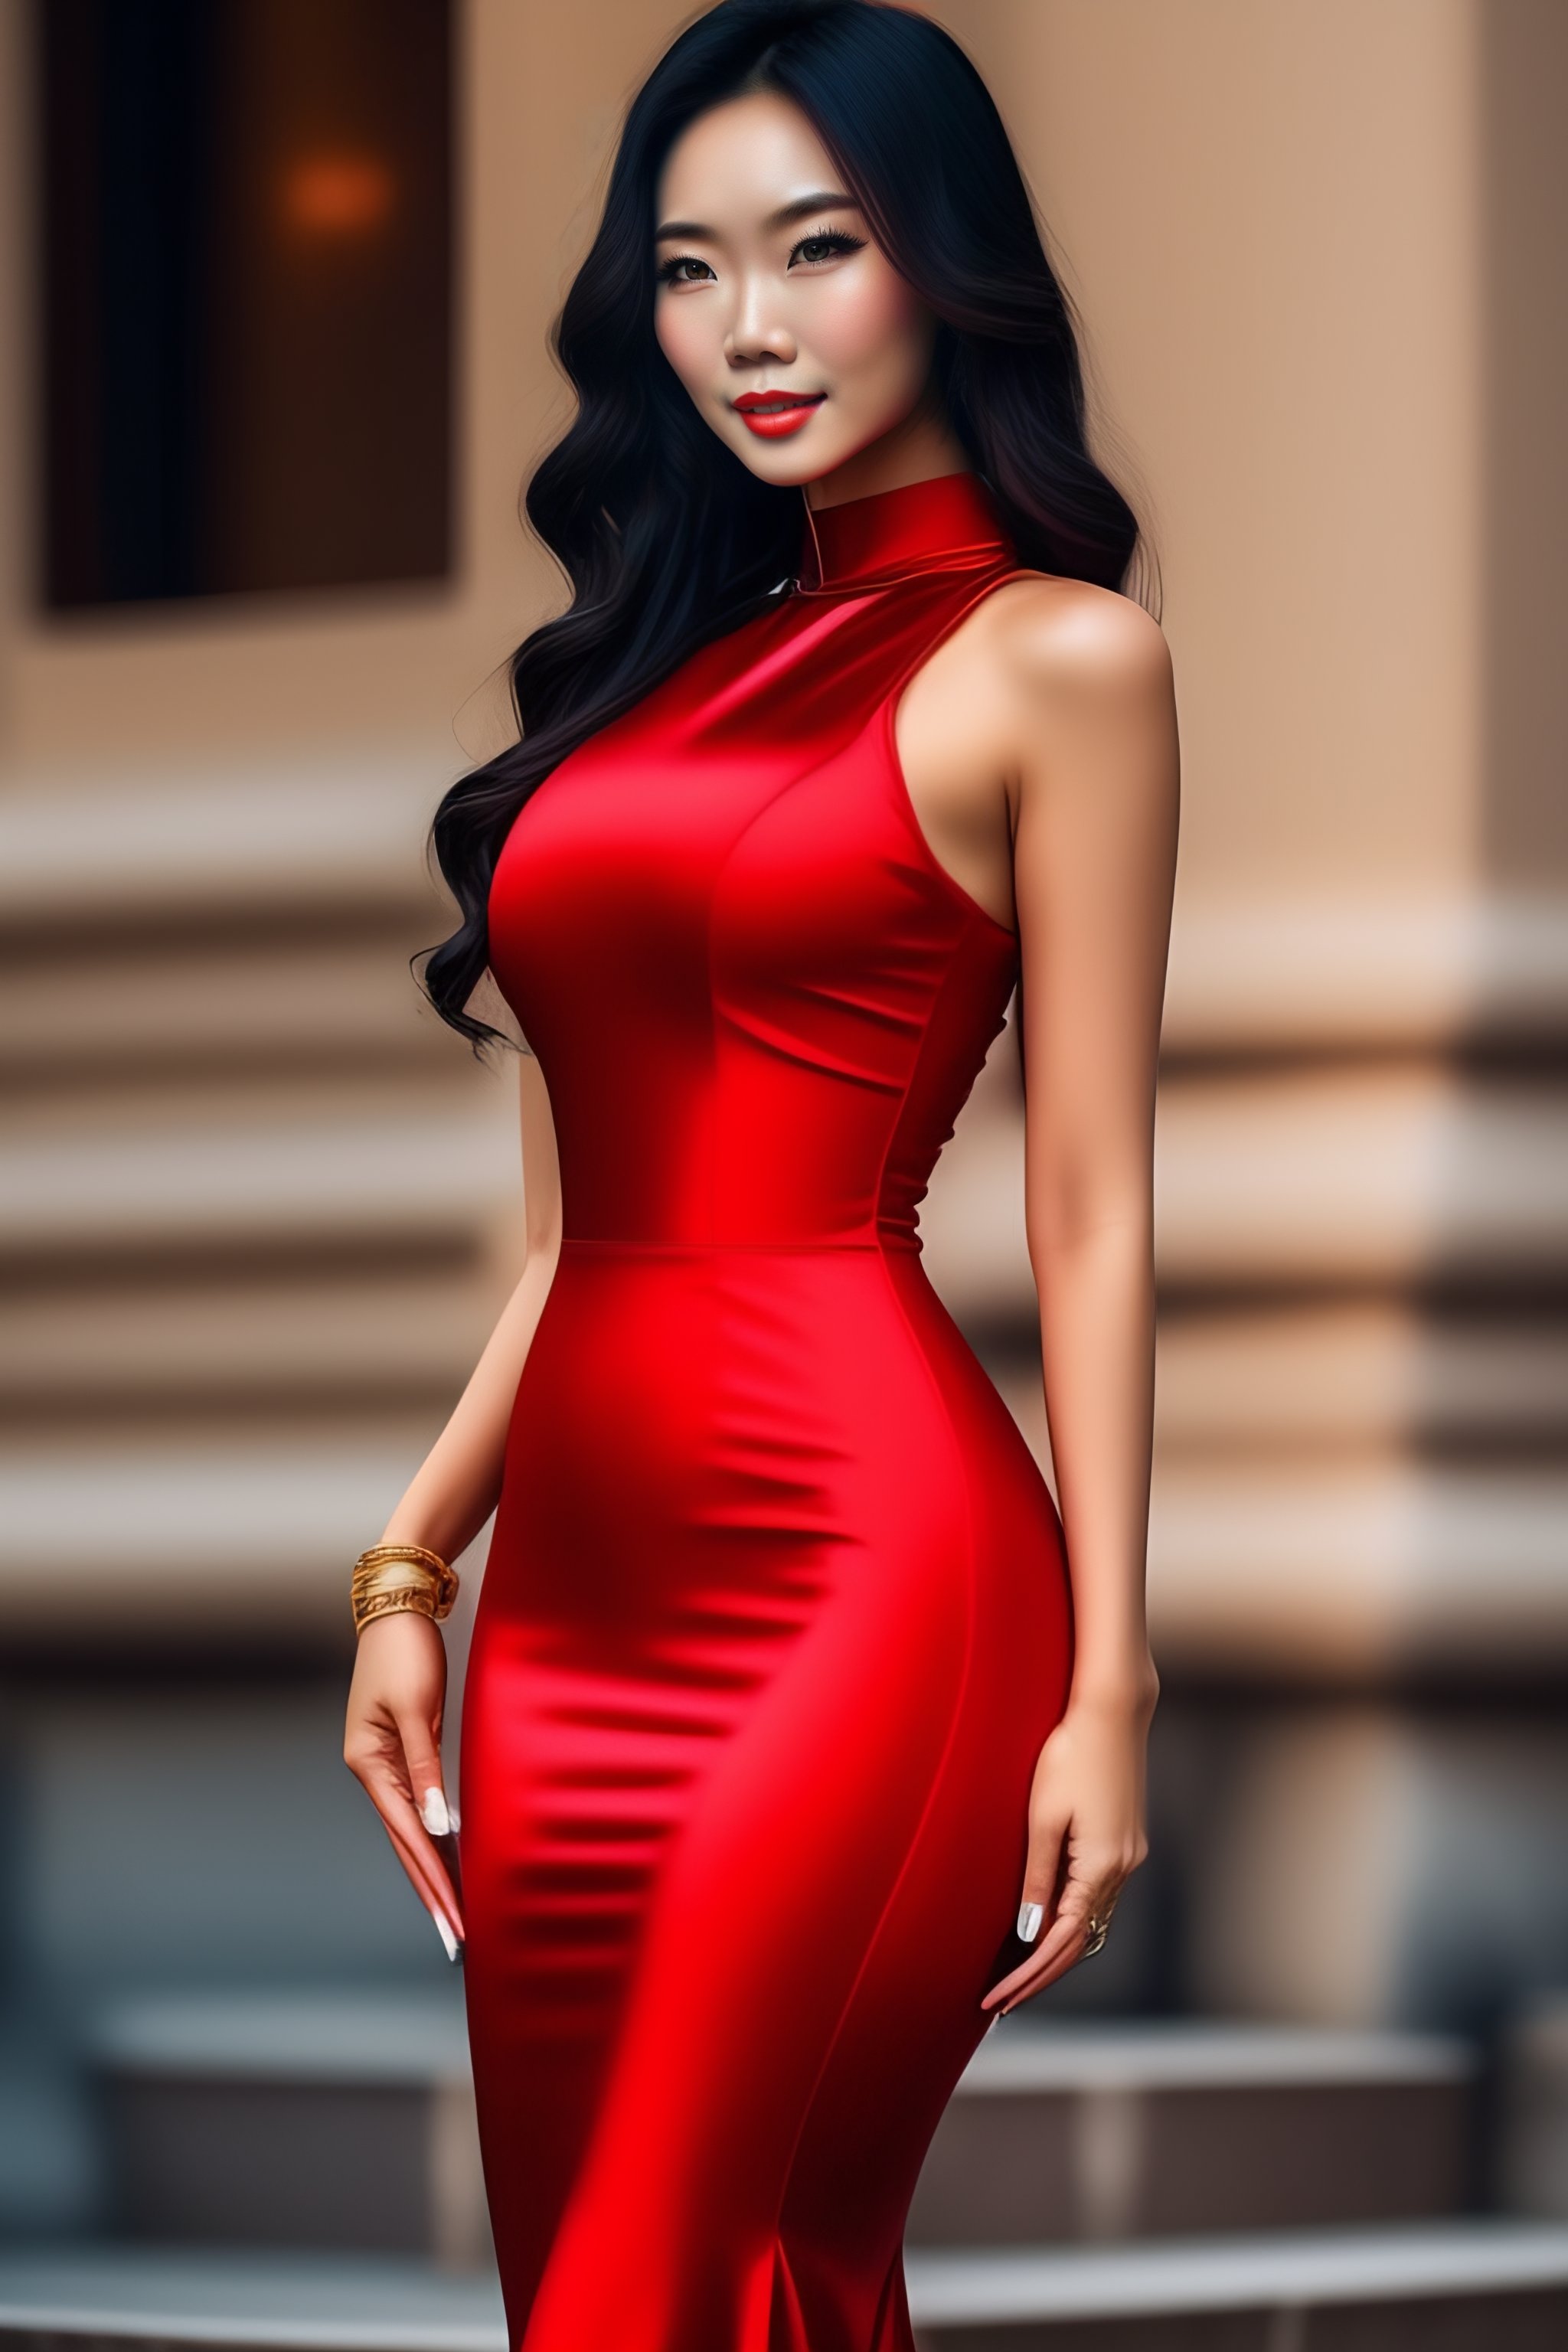 Lexica Sexy Asian Woman In Tight Red Dress Slim Figure